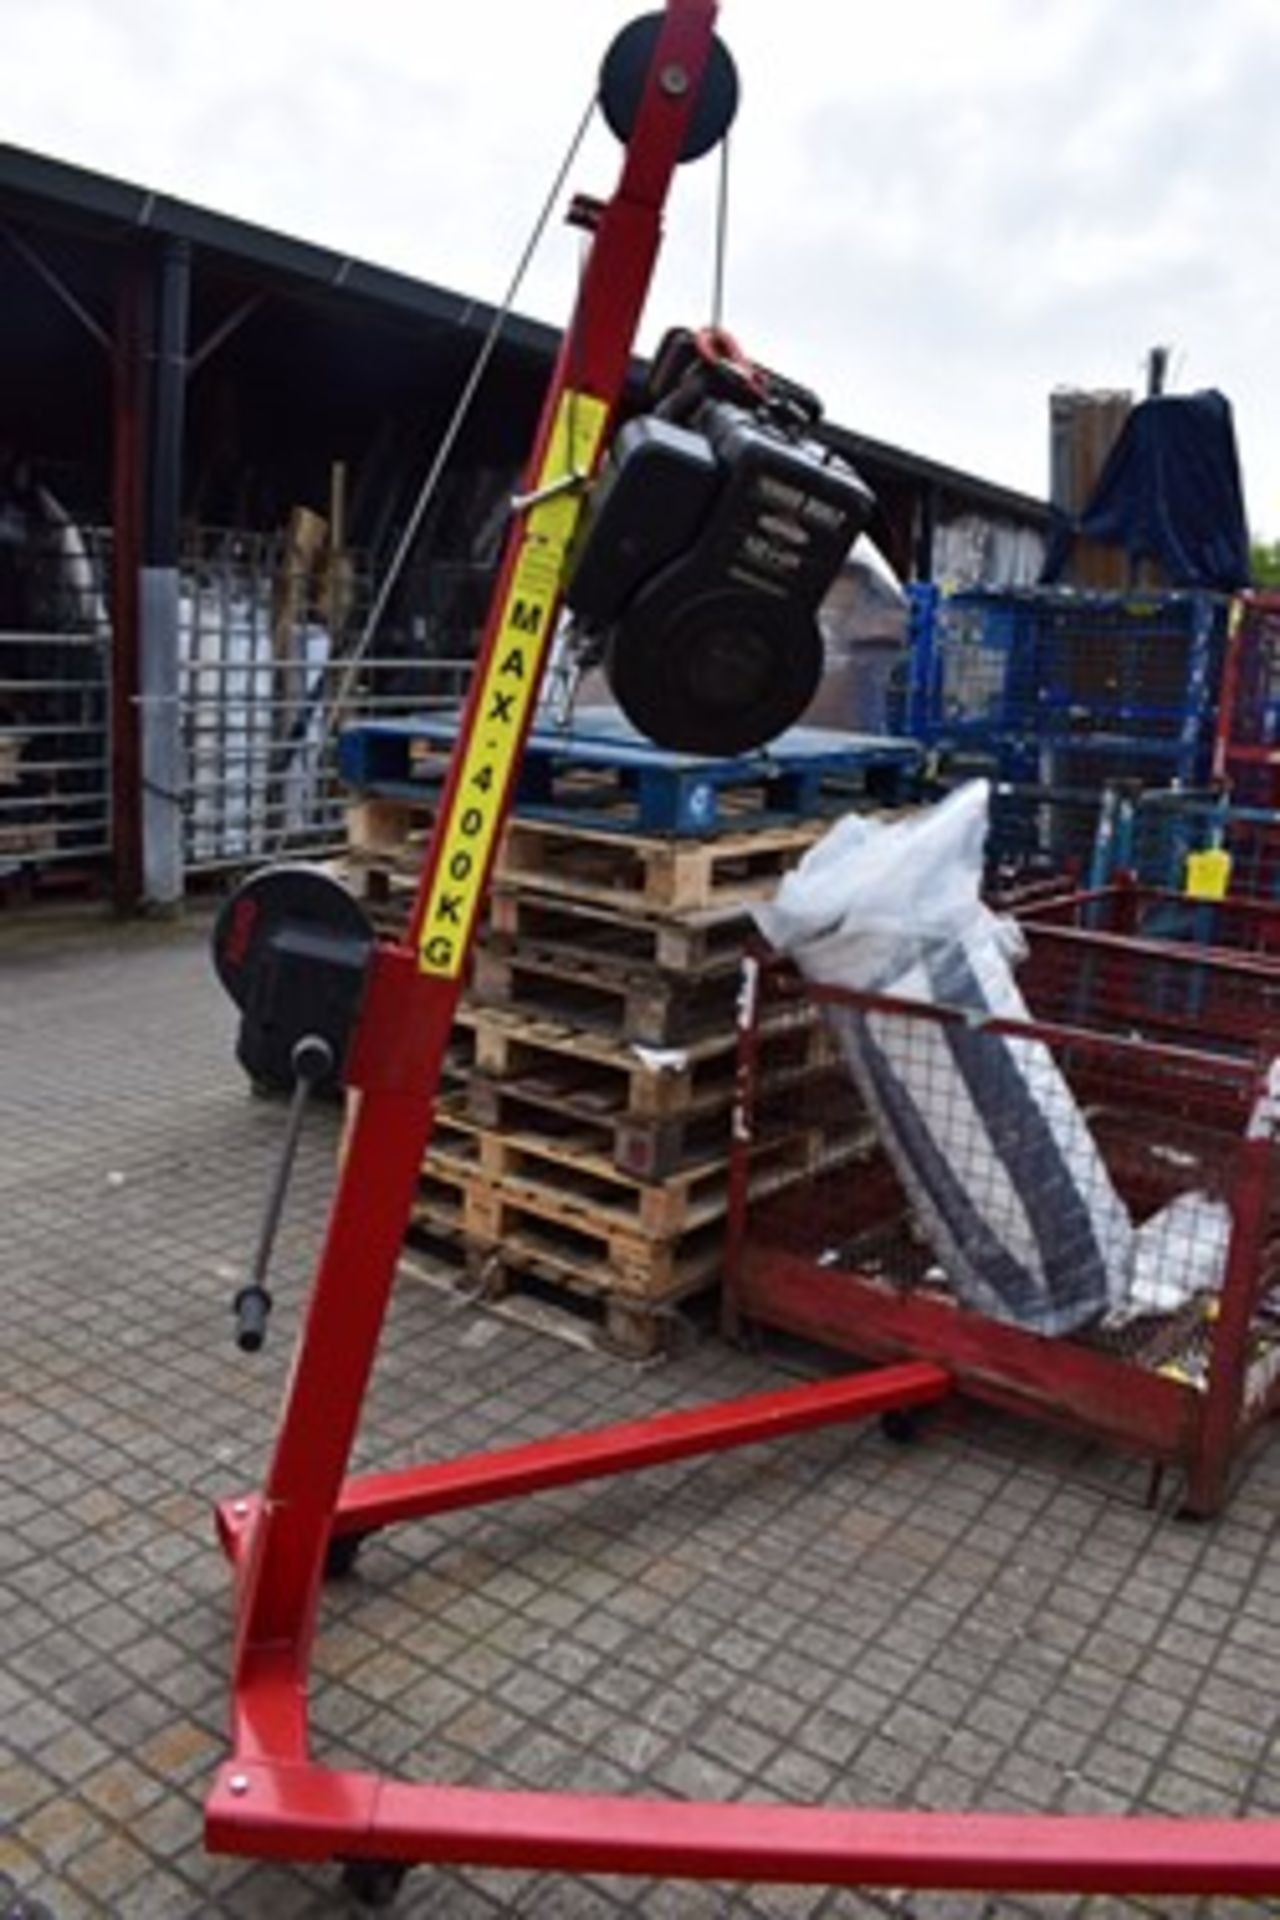 1 x Al-Ko manual portable engine hoist, 400kg capacity, engine not included - as new (SW) - Image 3 of 3